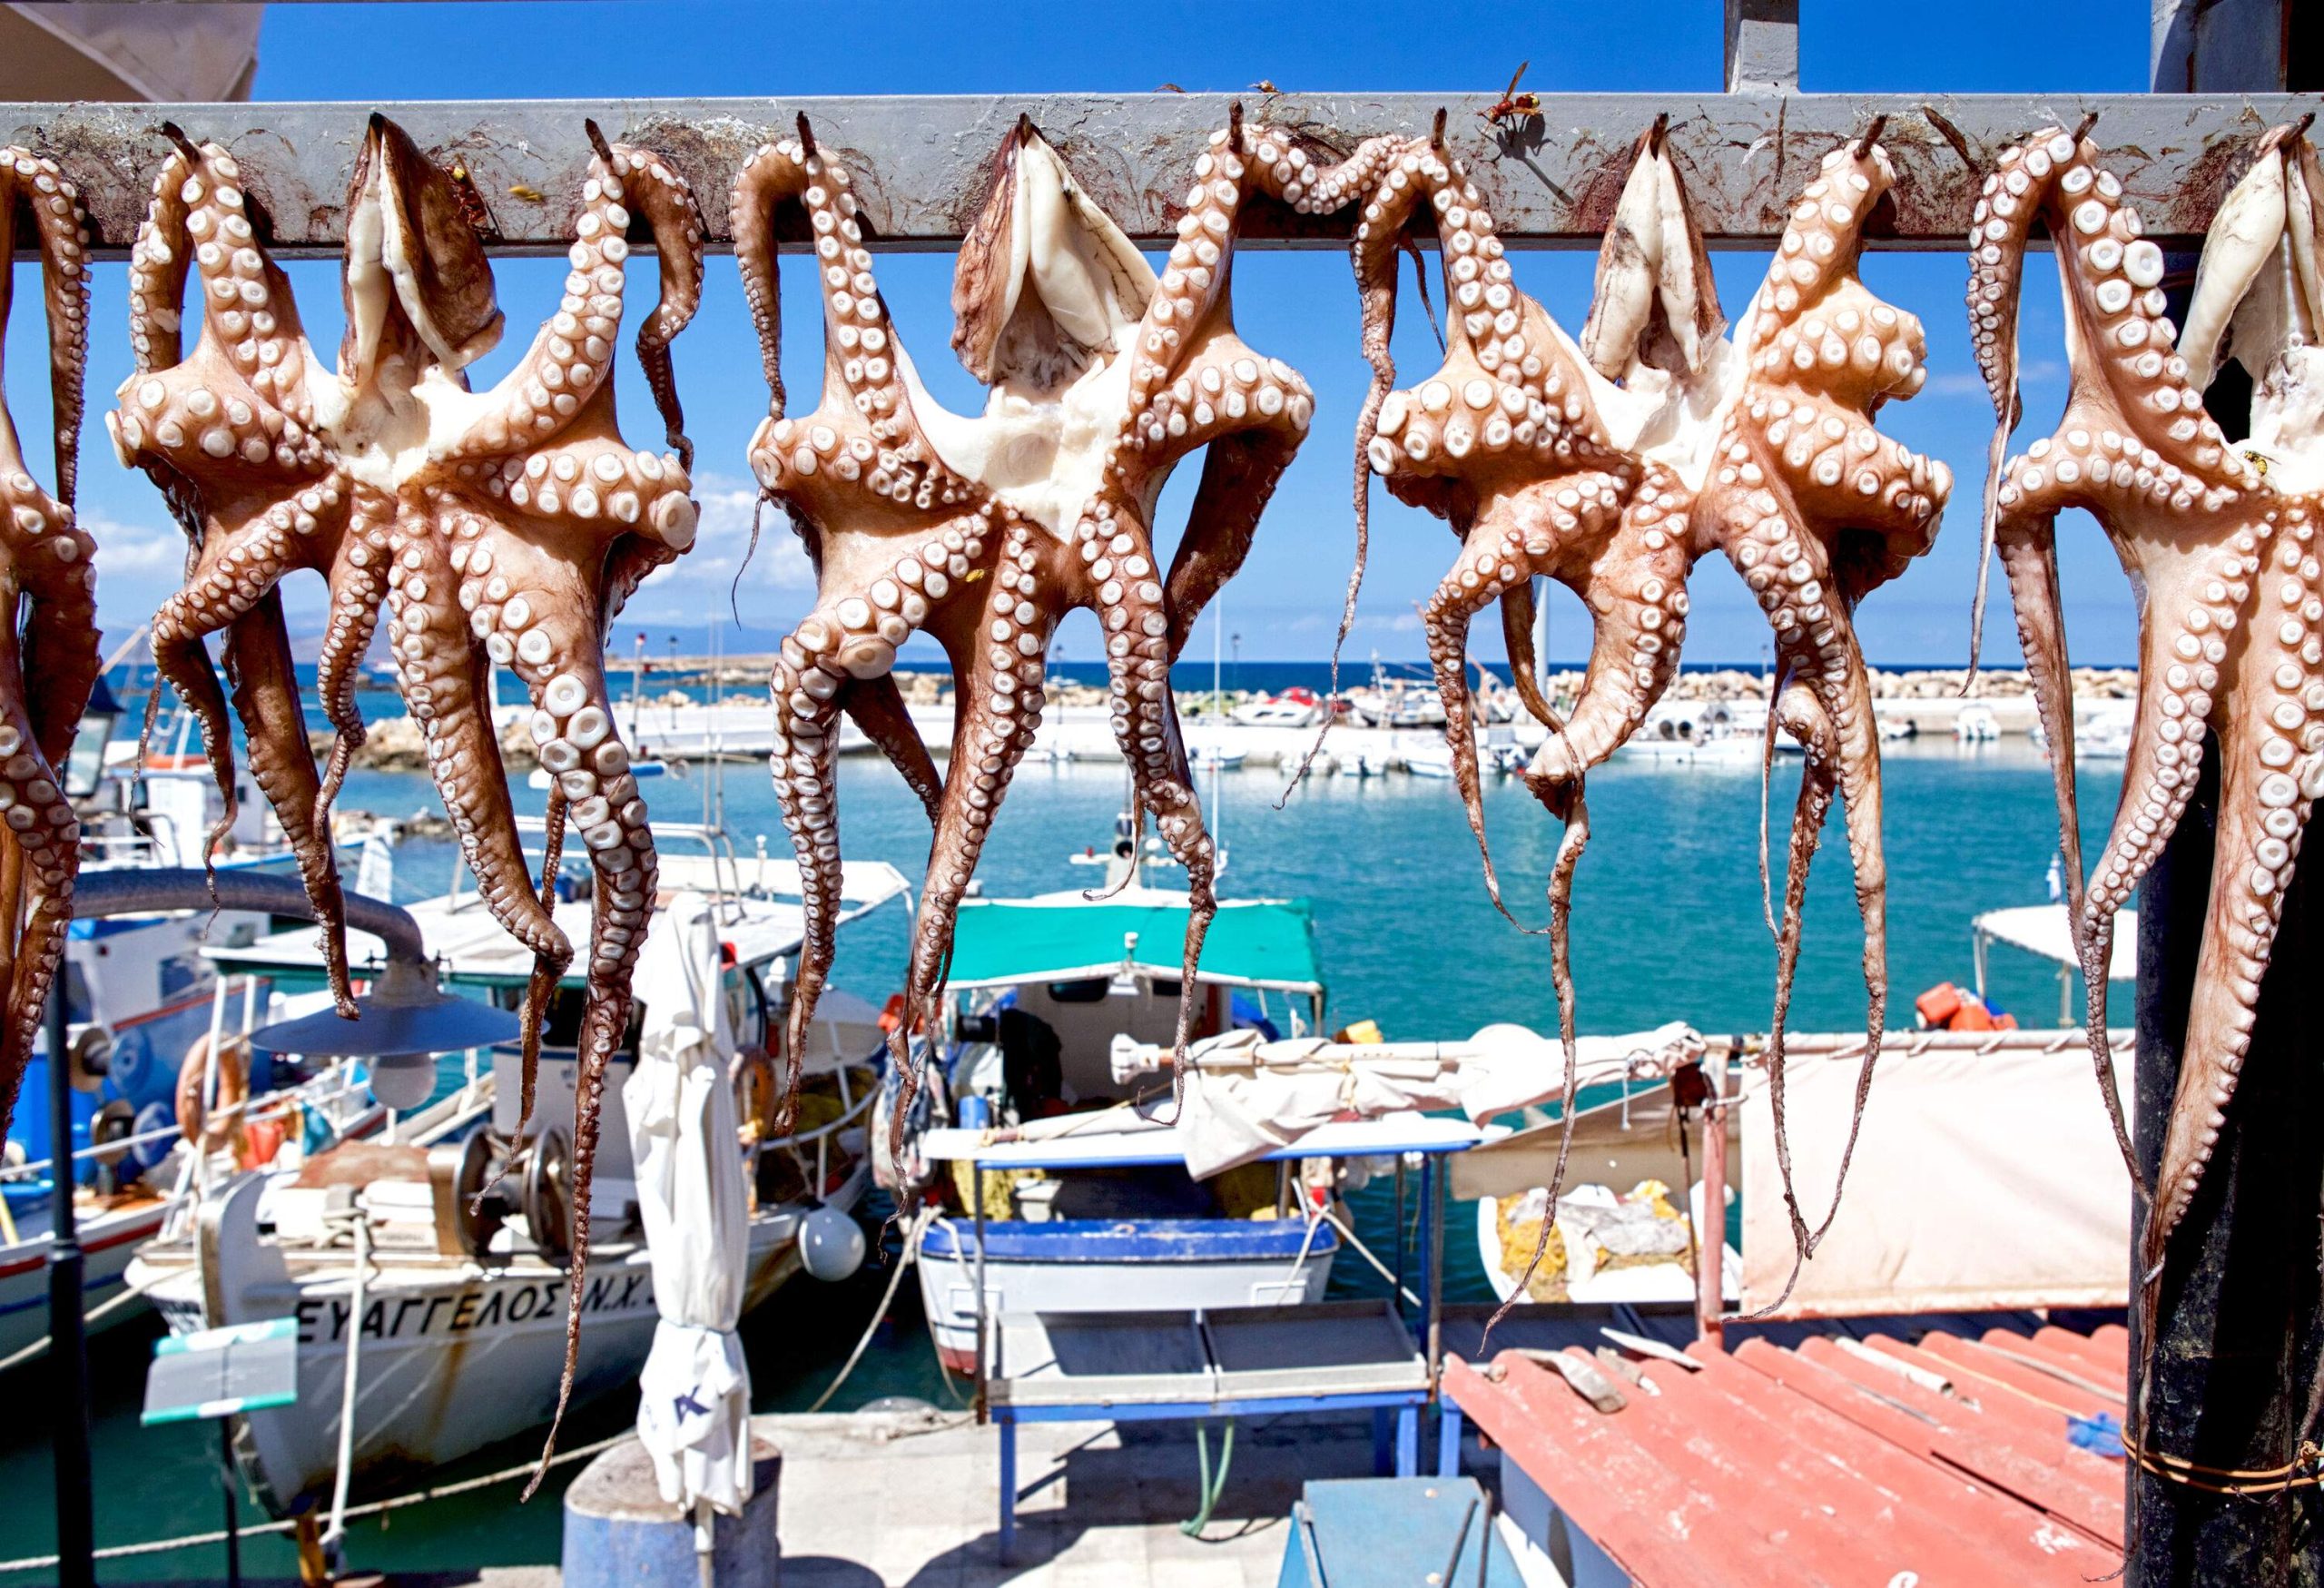 Rows of fresh octopus hanging out to dry in the sun.